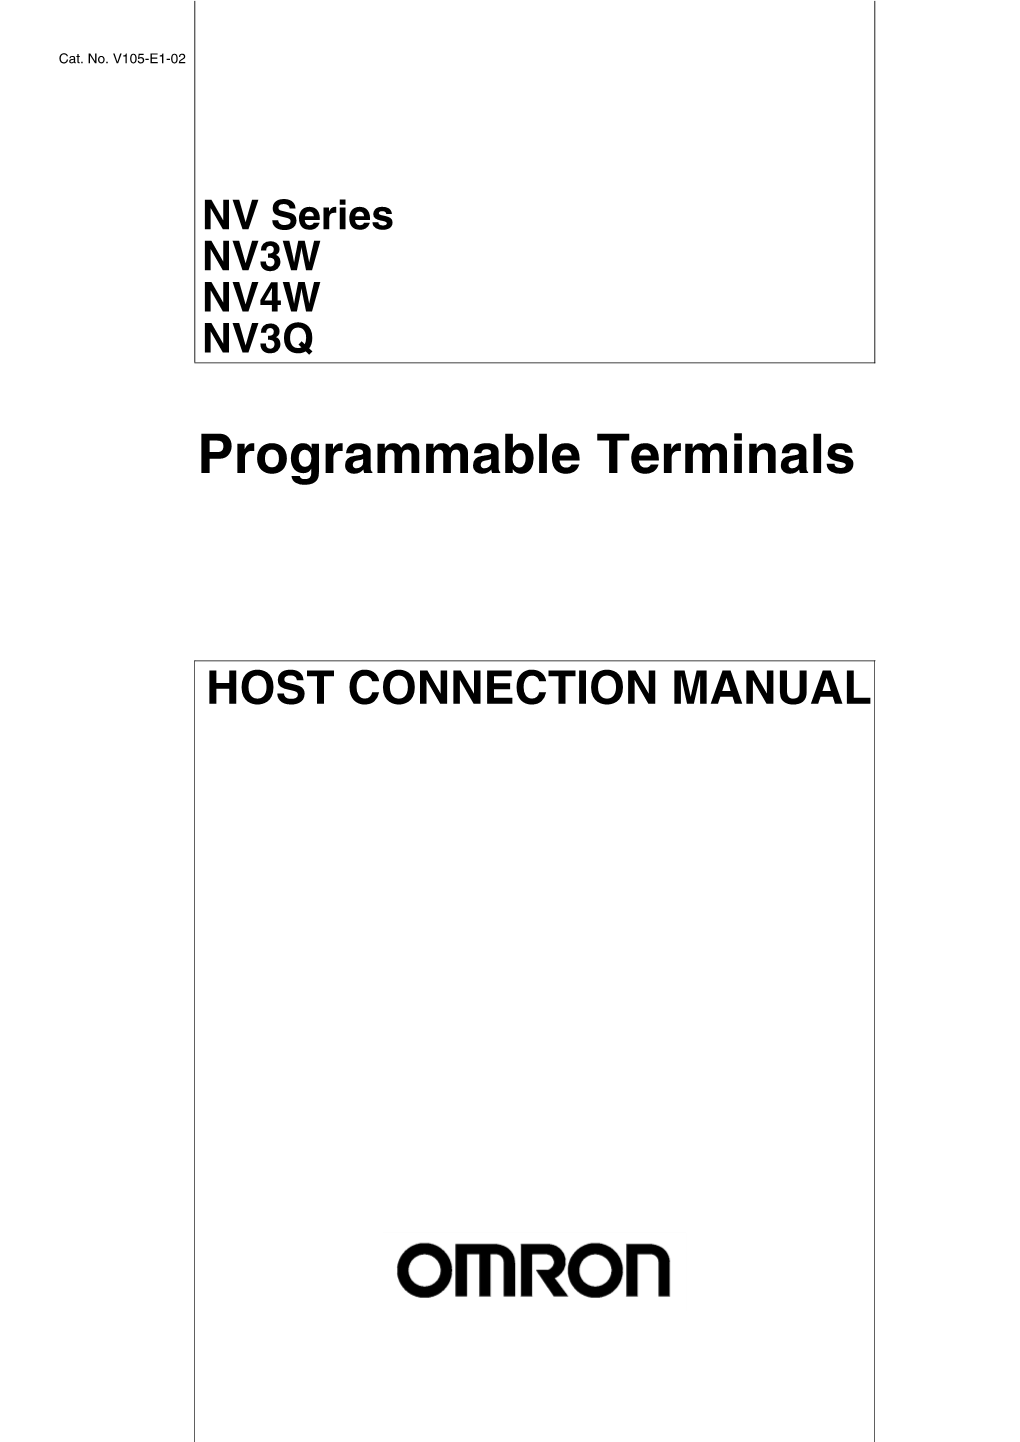 NV Series Programmable Terminals, Host Connection Manual